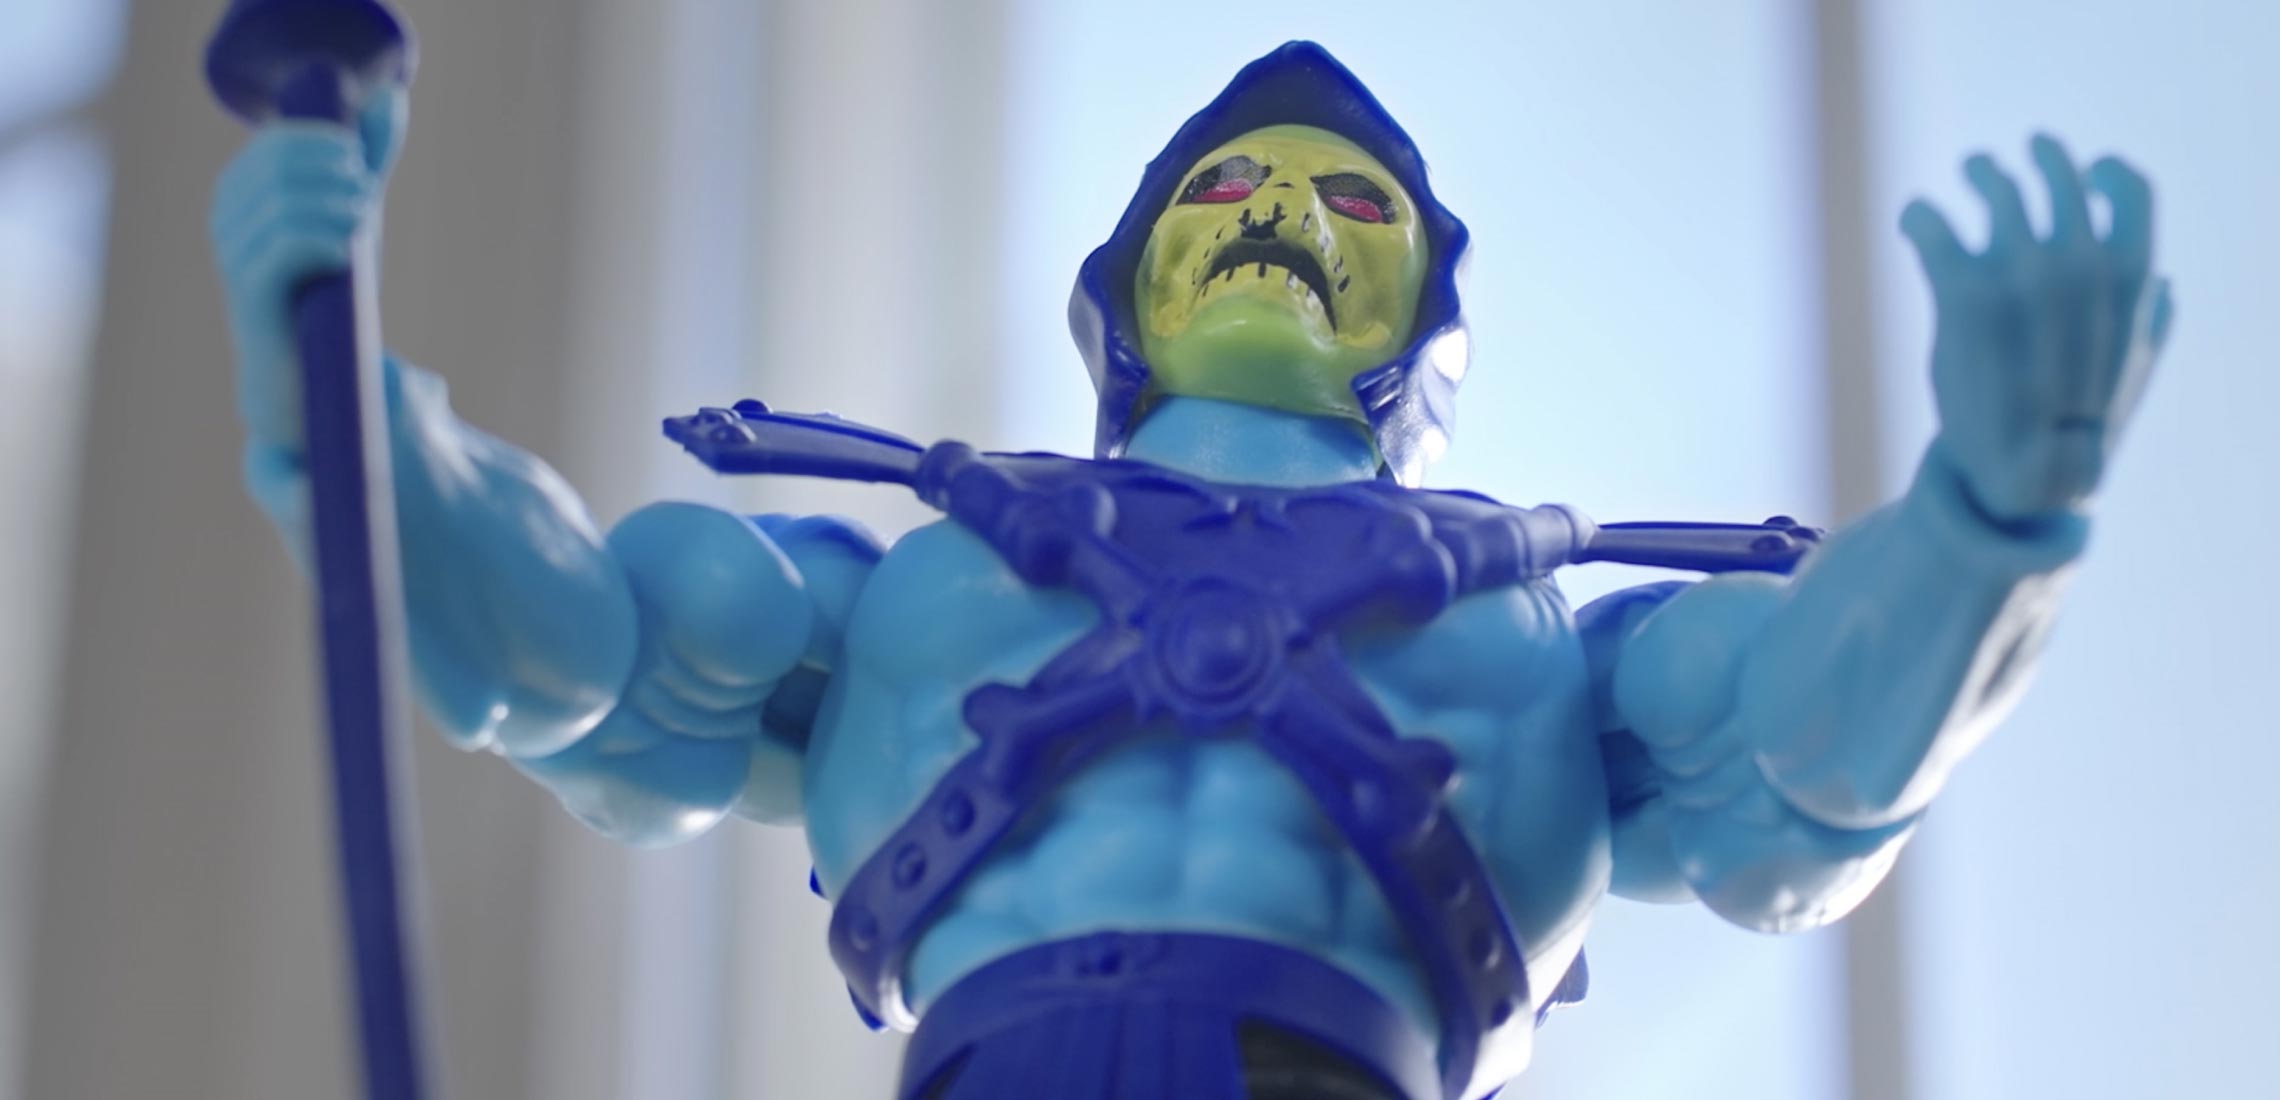 Click to play the "Skeletor" Video